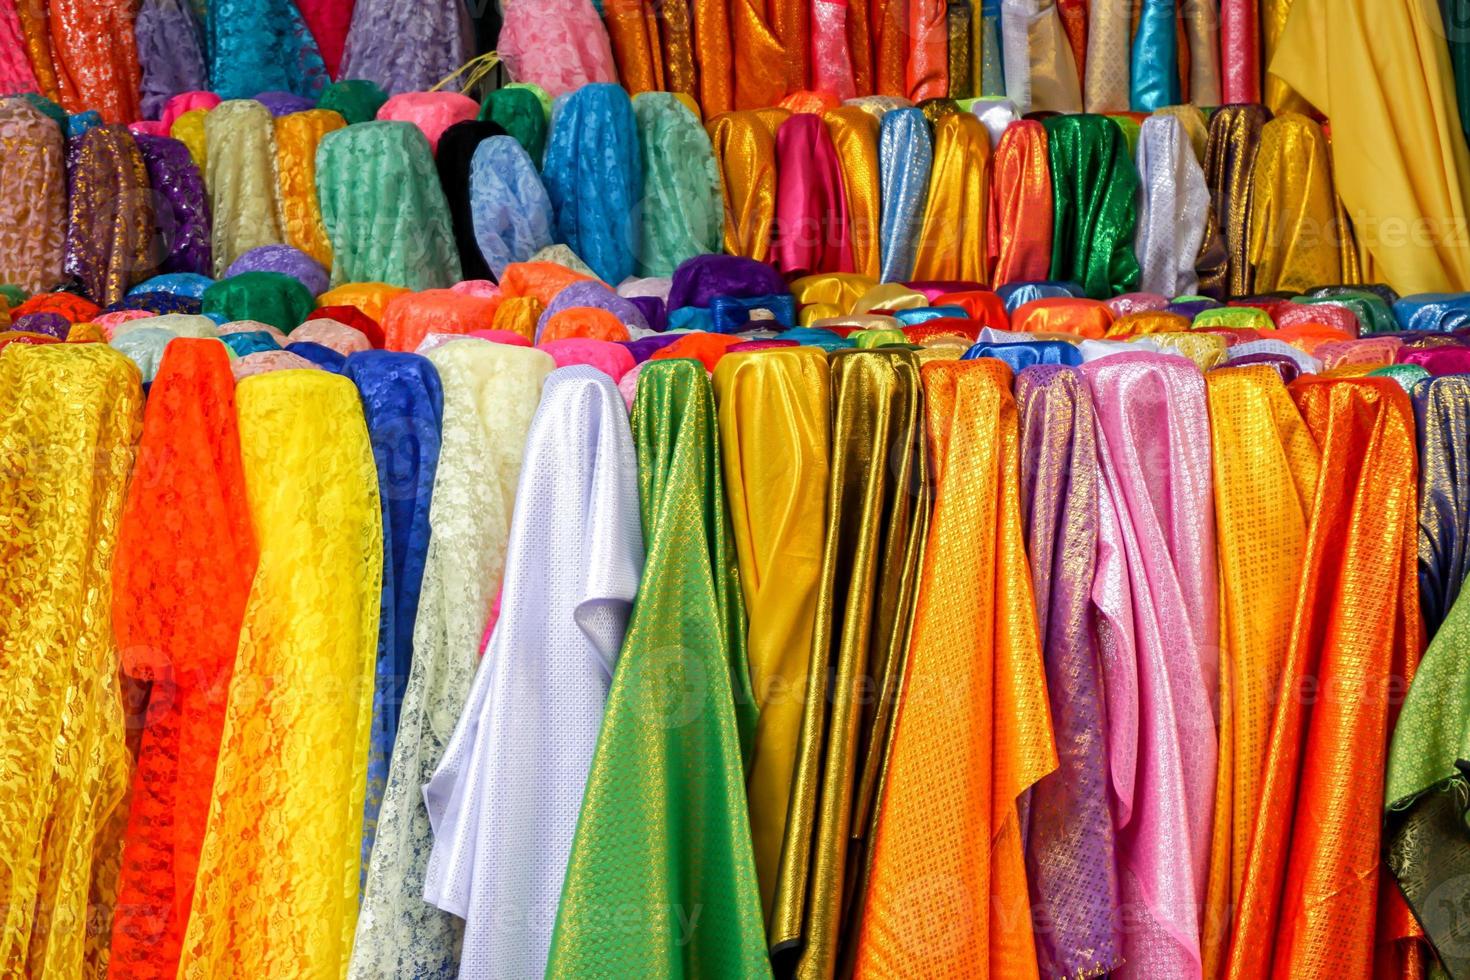 Colorful of Saree fabrics for sell at indian store, Chiangmai, Thailand. Saree fabrics is Traditional indian women dress Used as both the garment and the blanket. photo